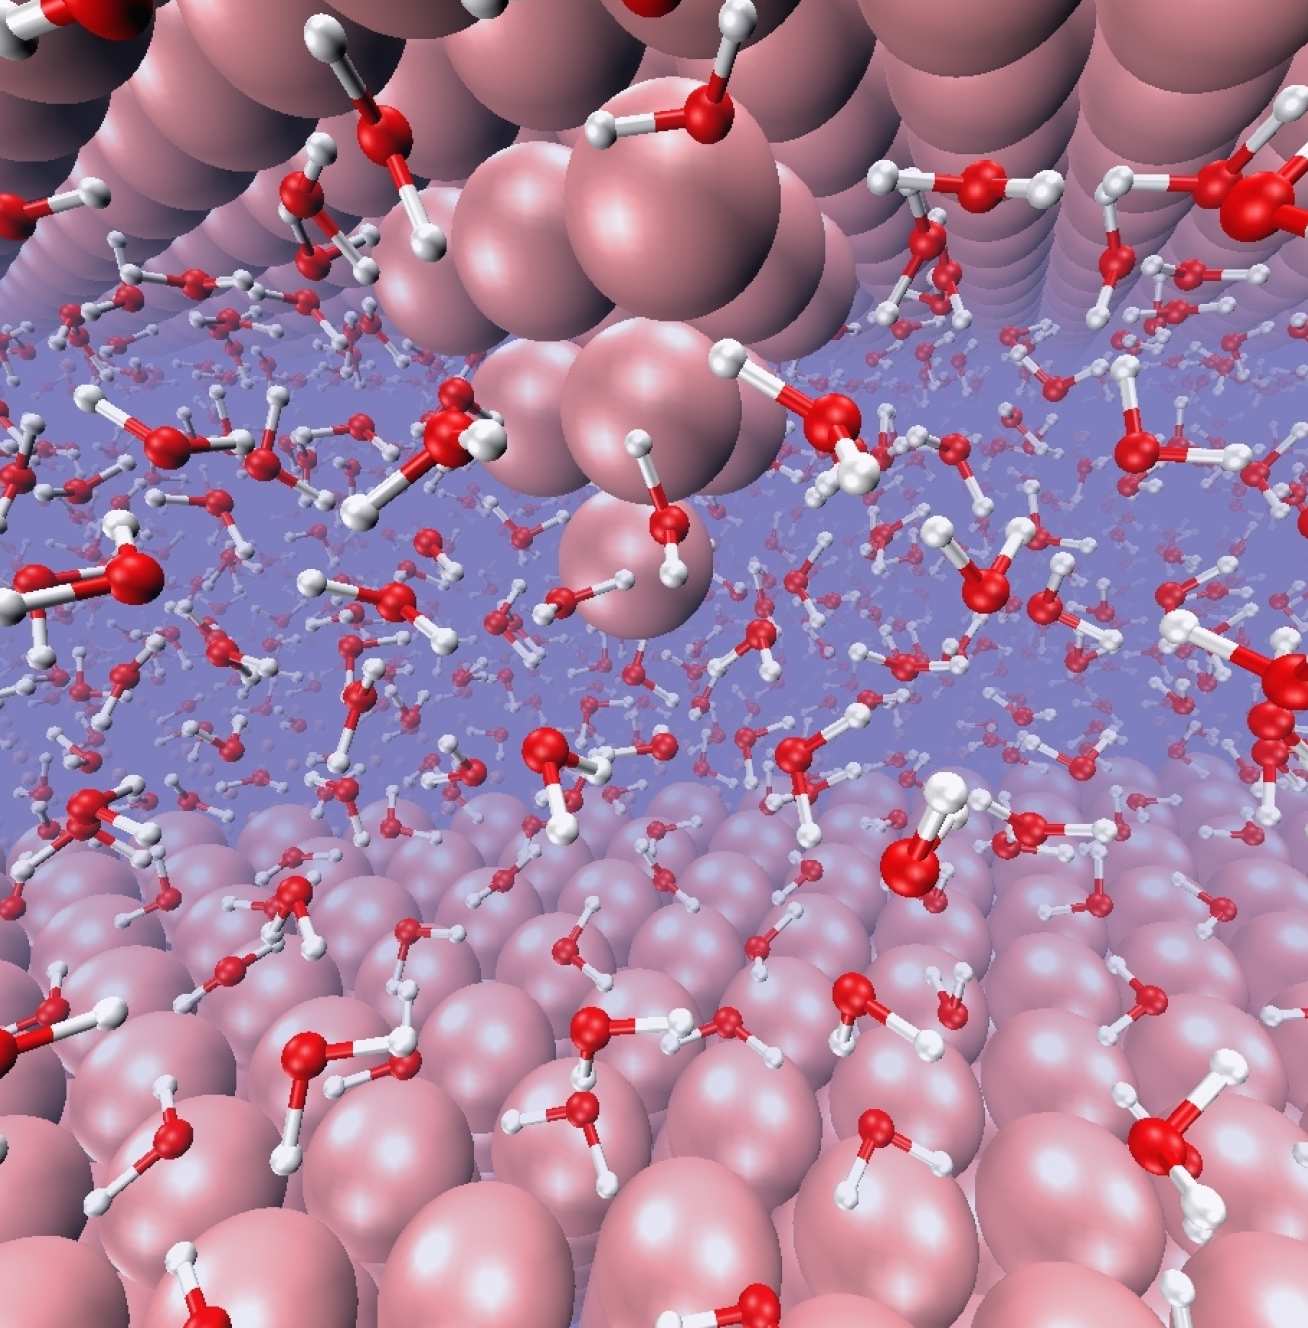 Red and white molecules between two layers of aligned balls